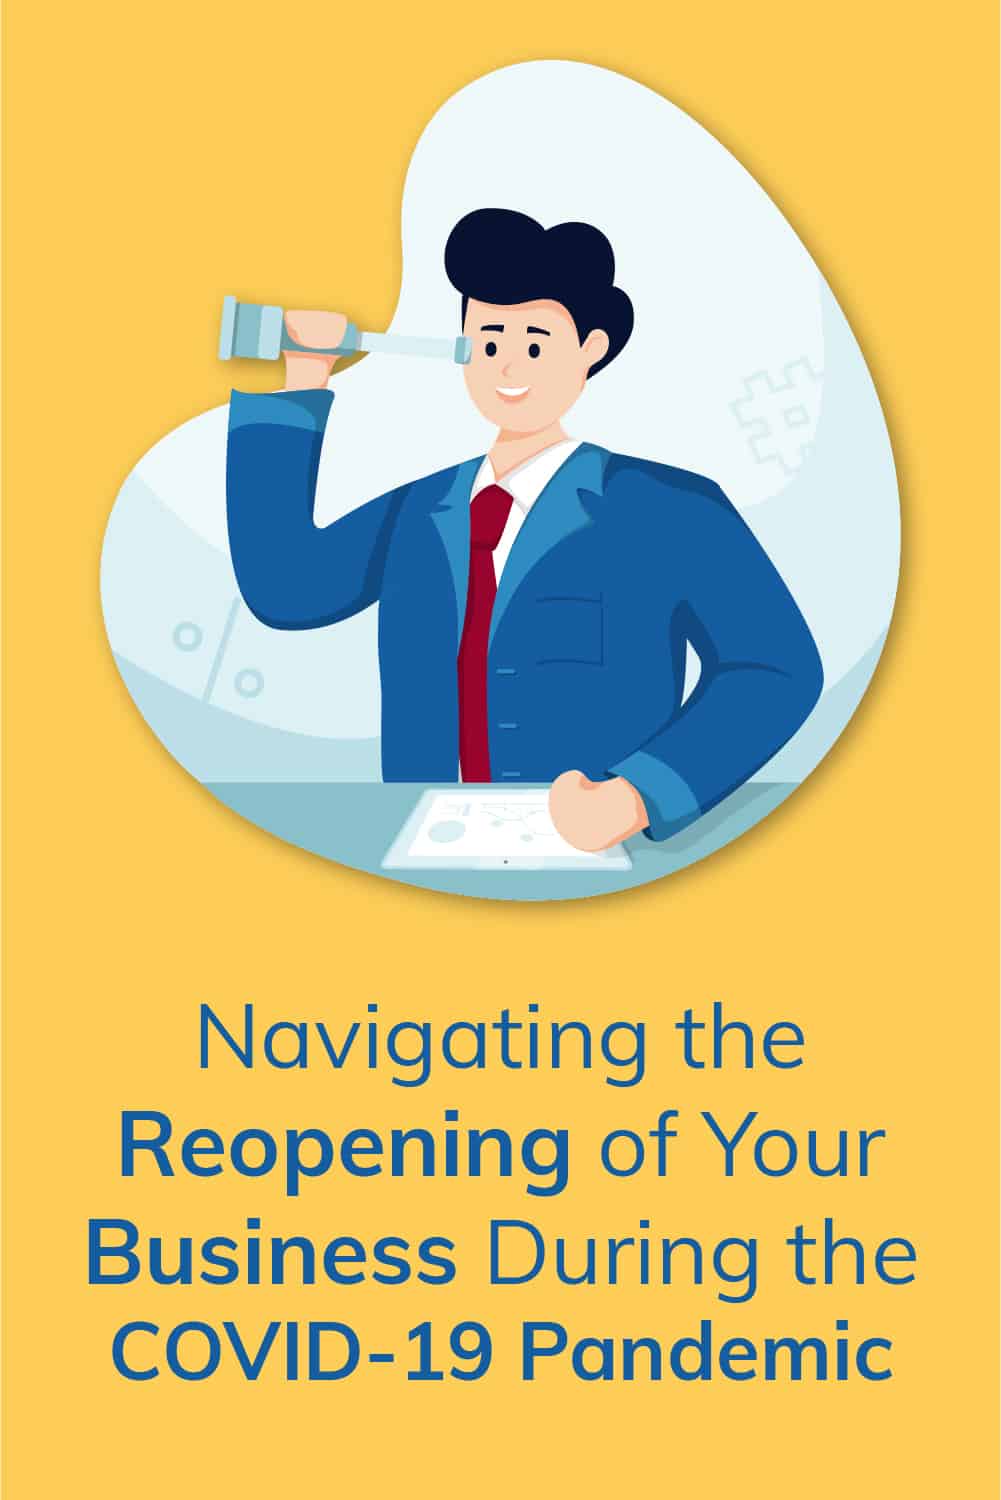 Reopening your business during the pandemic requires careful planning and attention to details. Here are a few tips to navigate your reopening. via @scopedesign